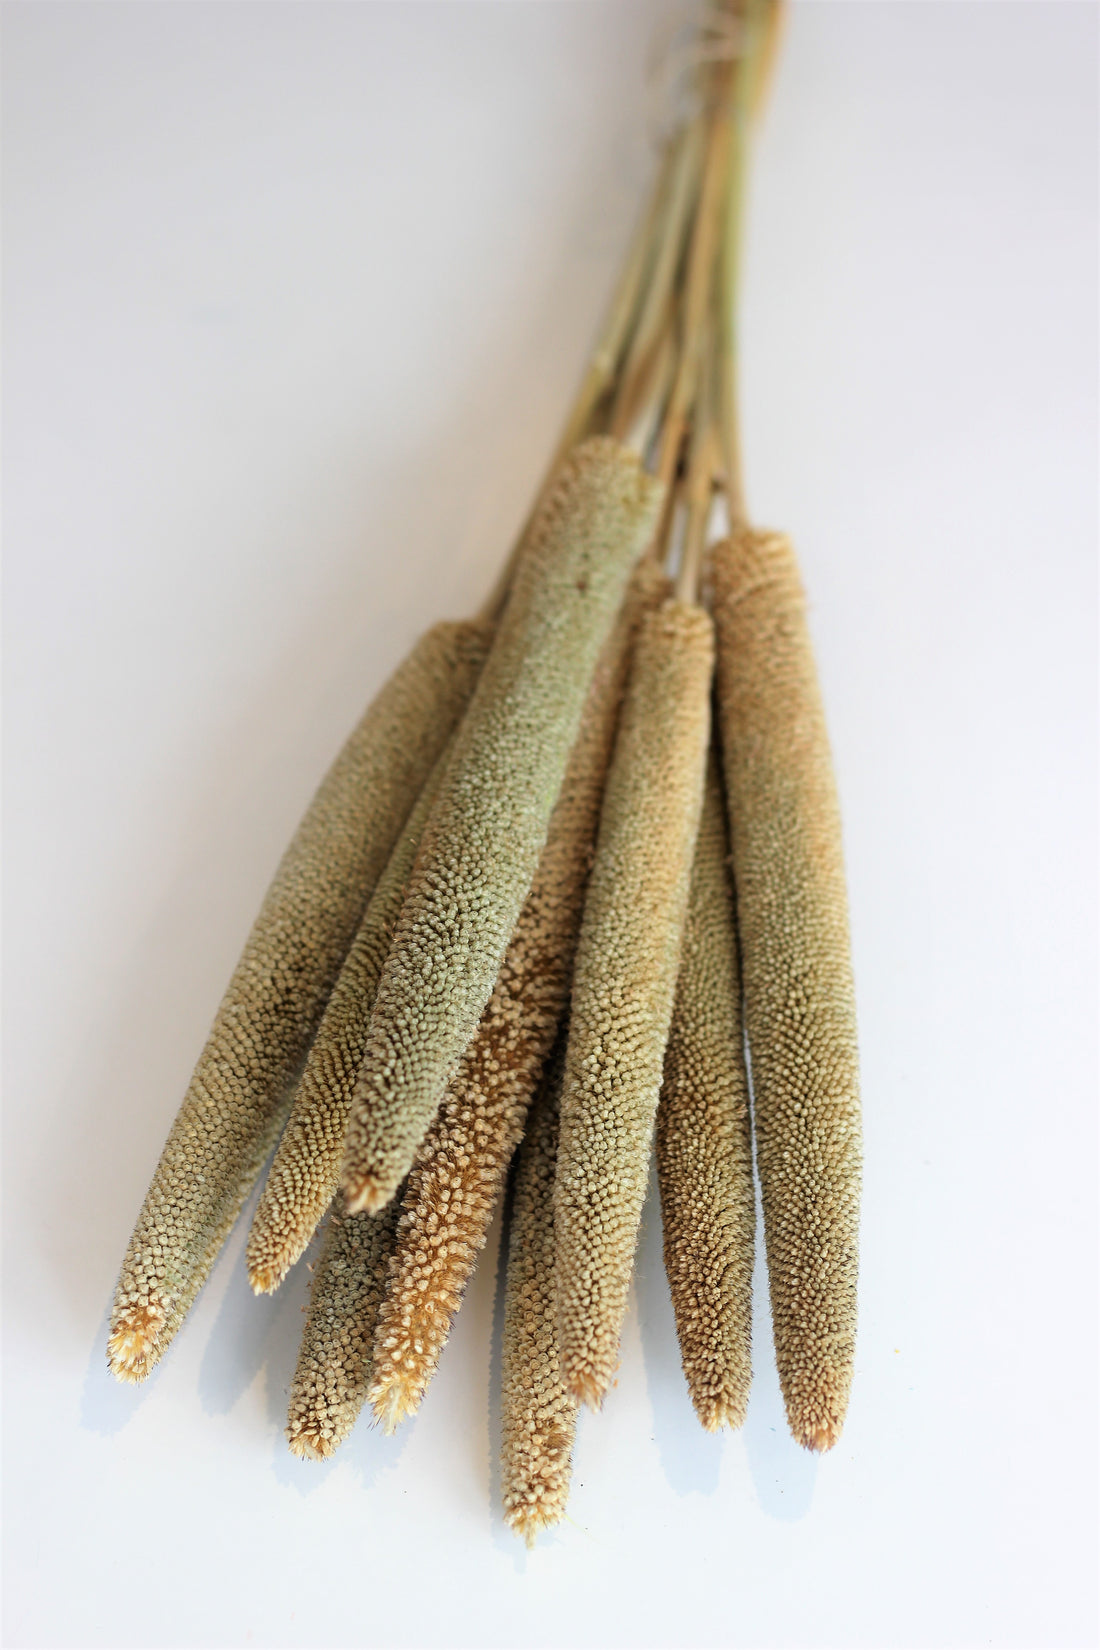 Dried Babala - Natural Sleeved Bunch, 10 Stems, 60 cm